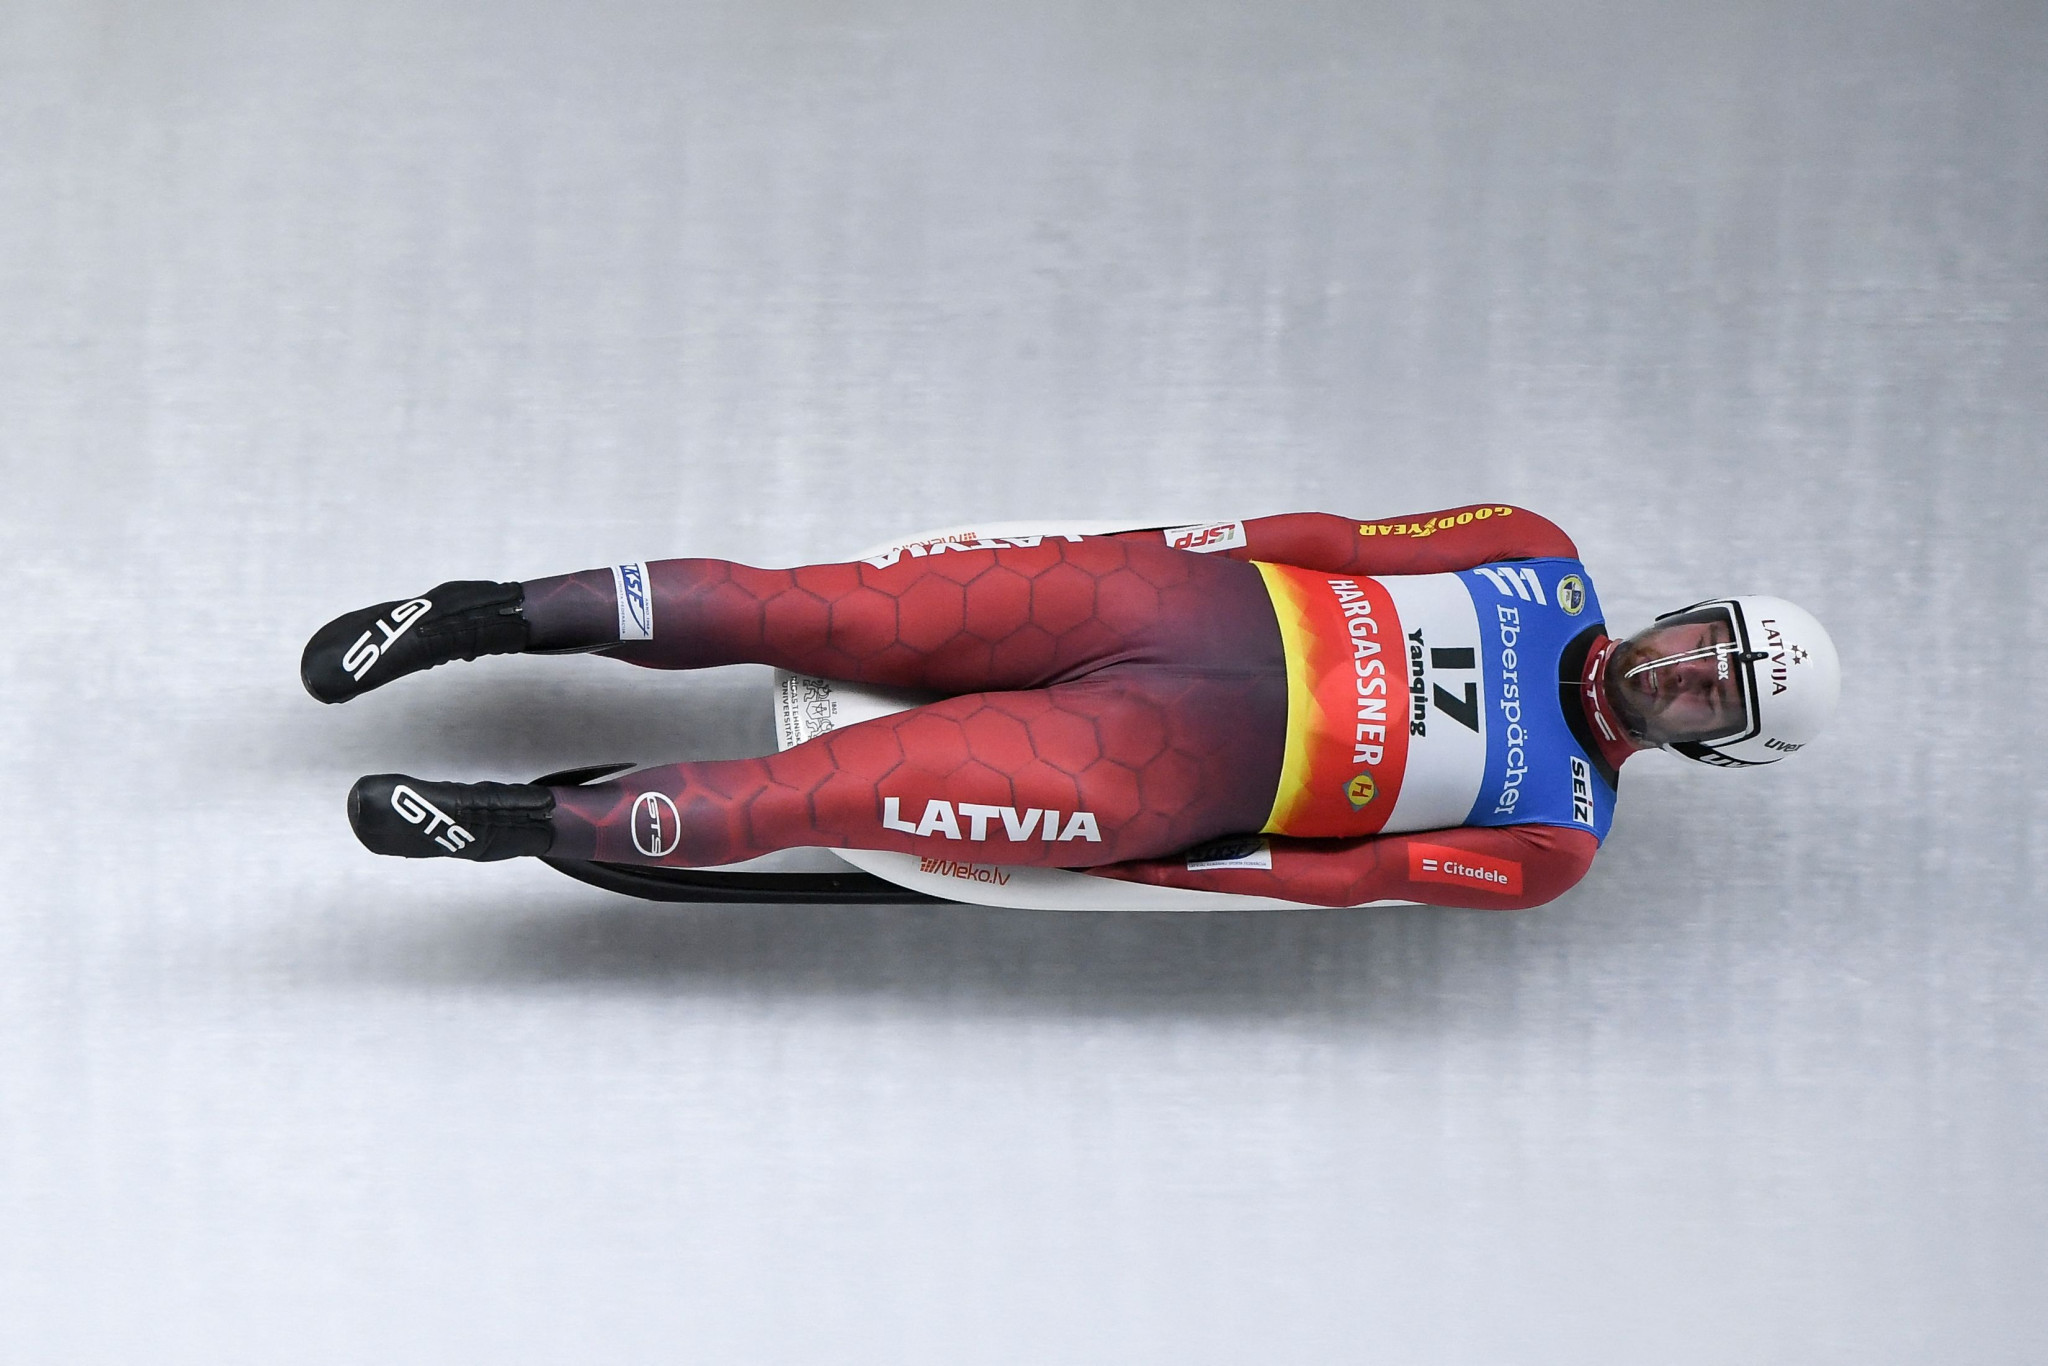 Aparjods earns historic men's singles victory at Luge World Cup in Sochi